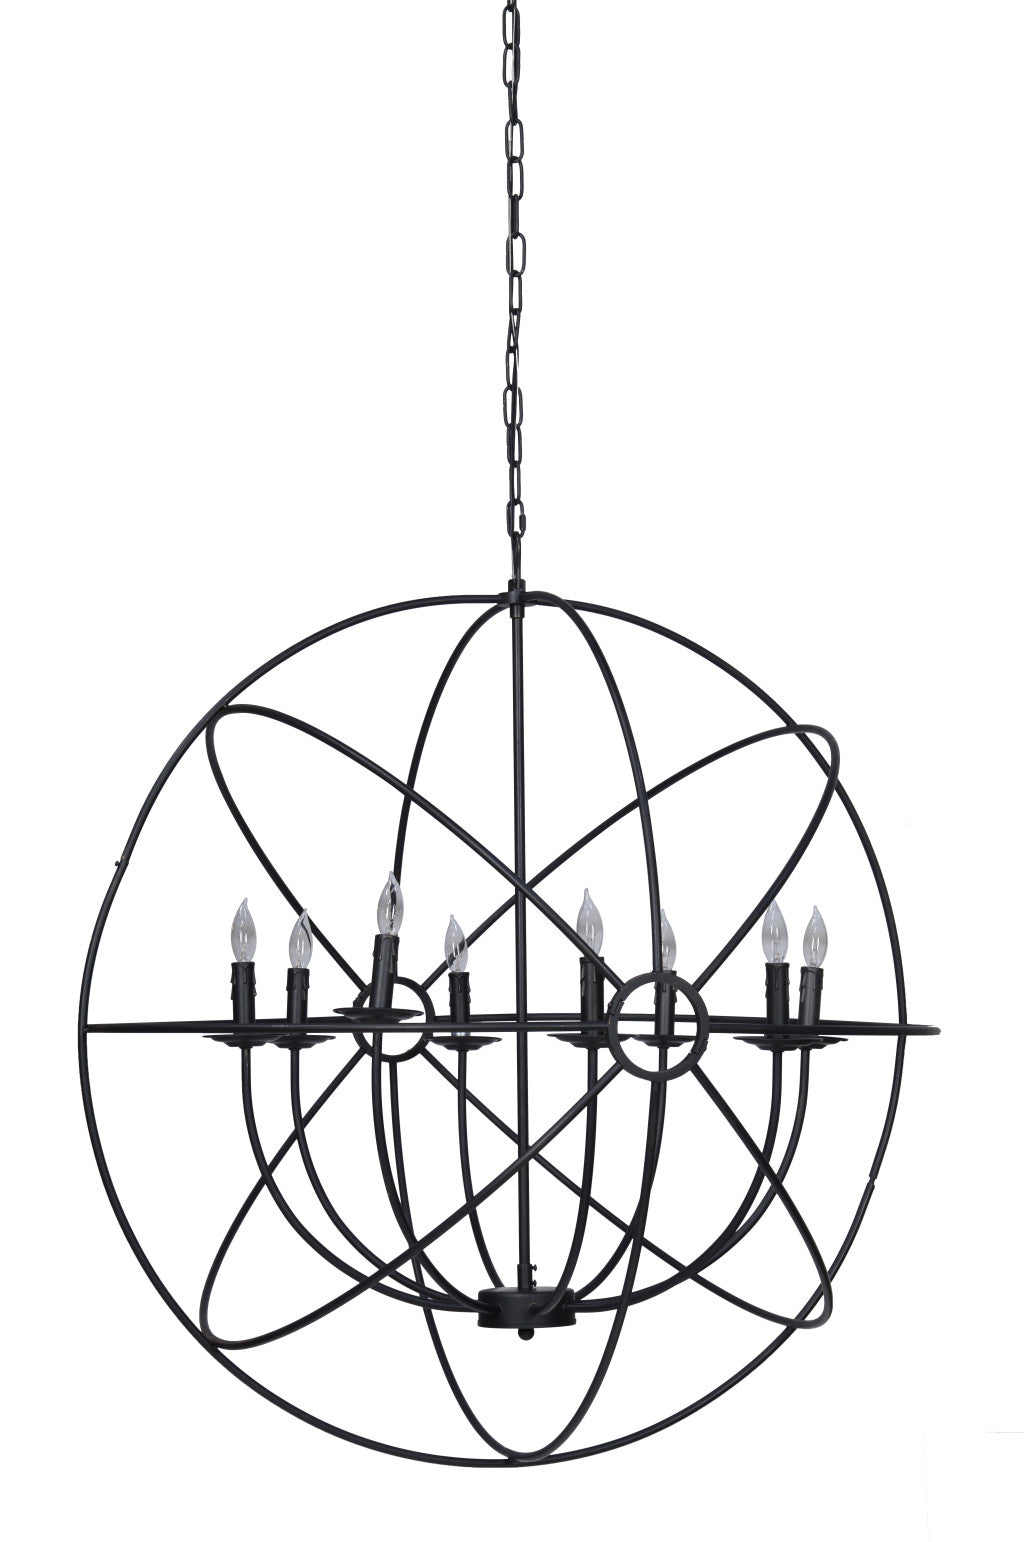 Chandelier Eight Light Iron And Glass Dimmable Semi-Flush Ceiling Light - 99fab 